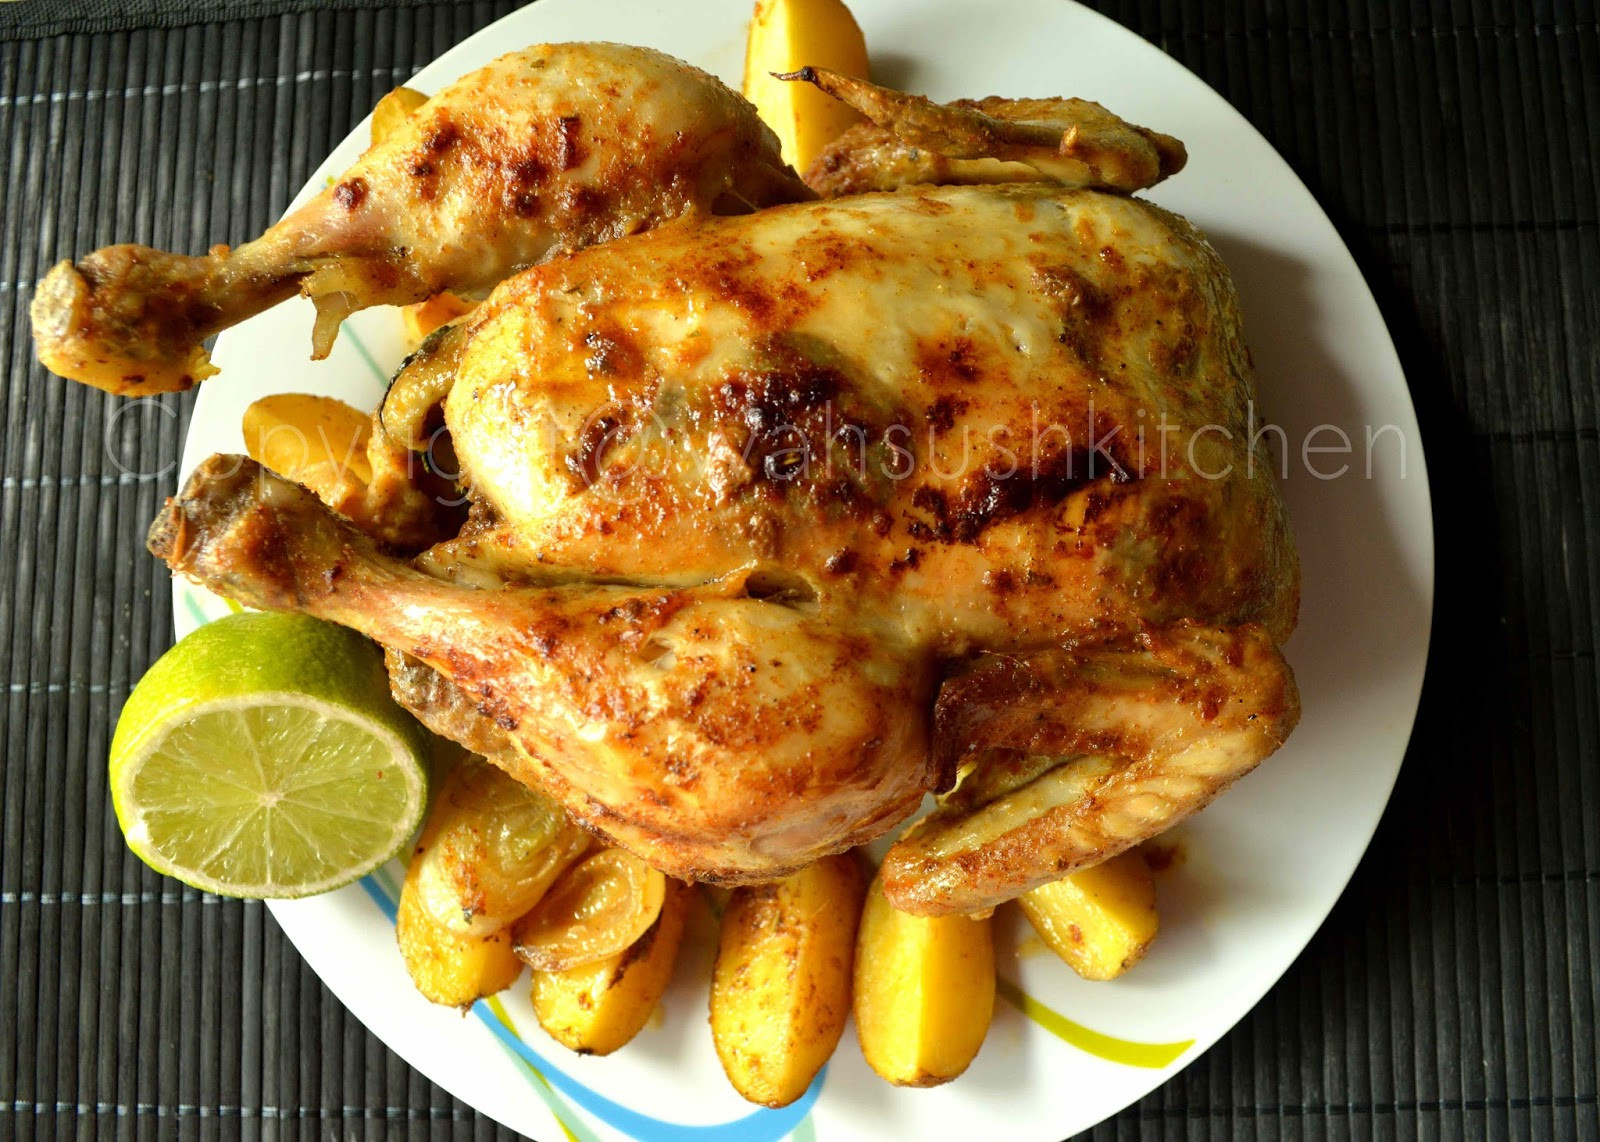 How To Bake A Whole Chicken
 WahSush Kitchen Baked whole chicken